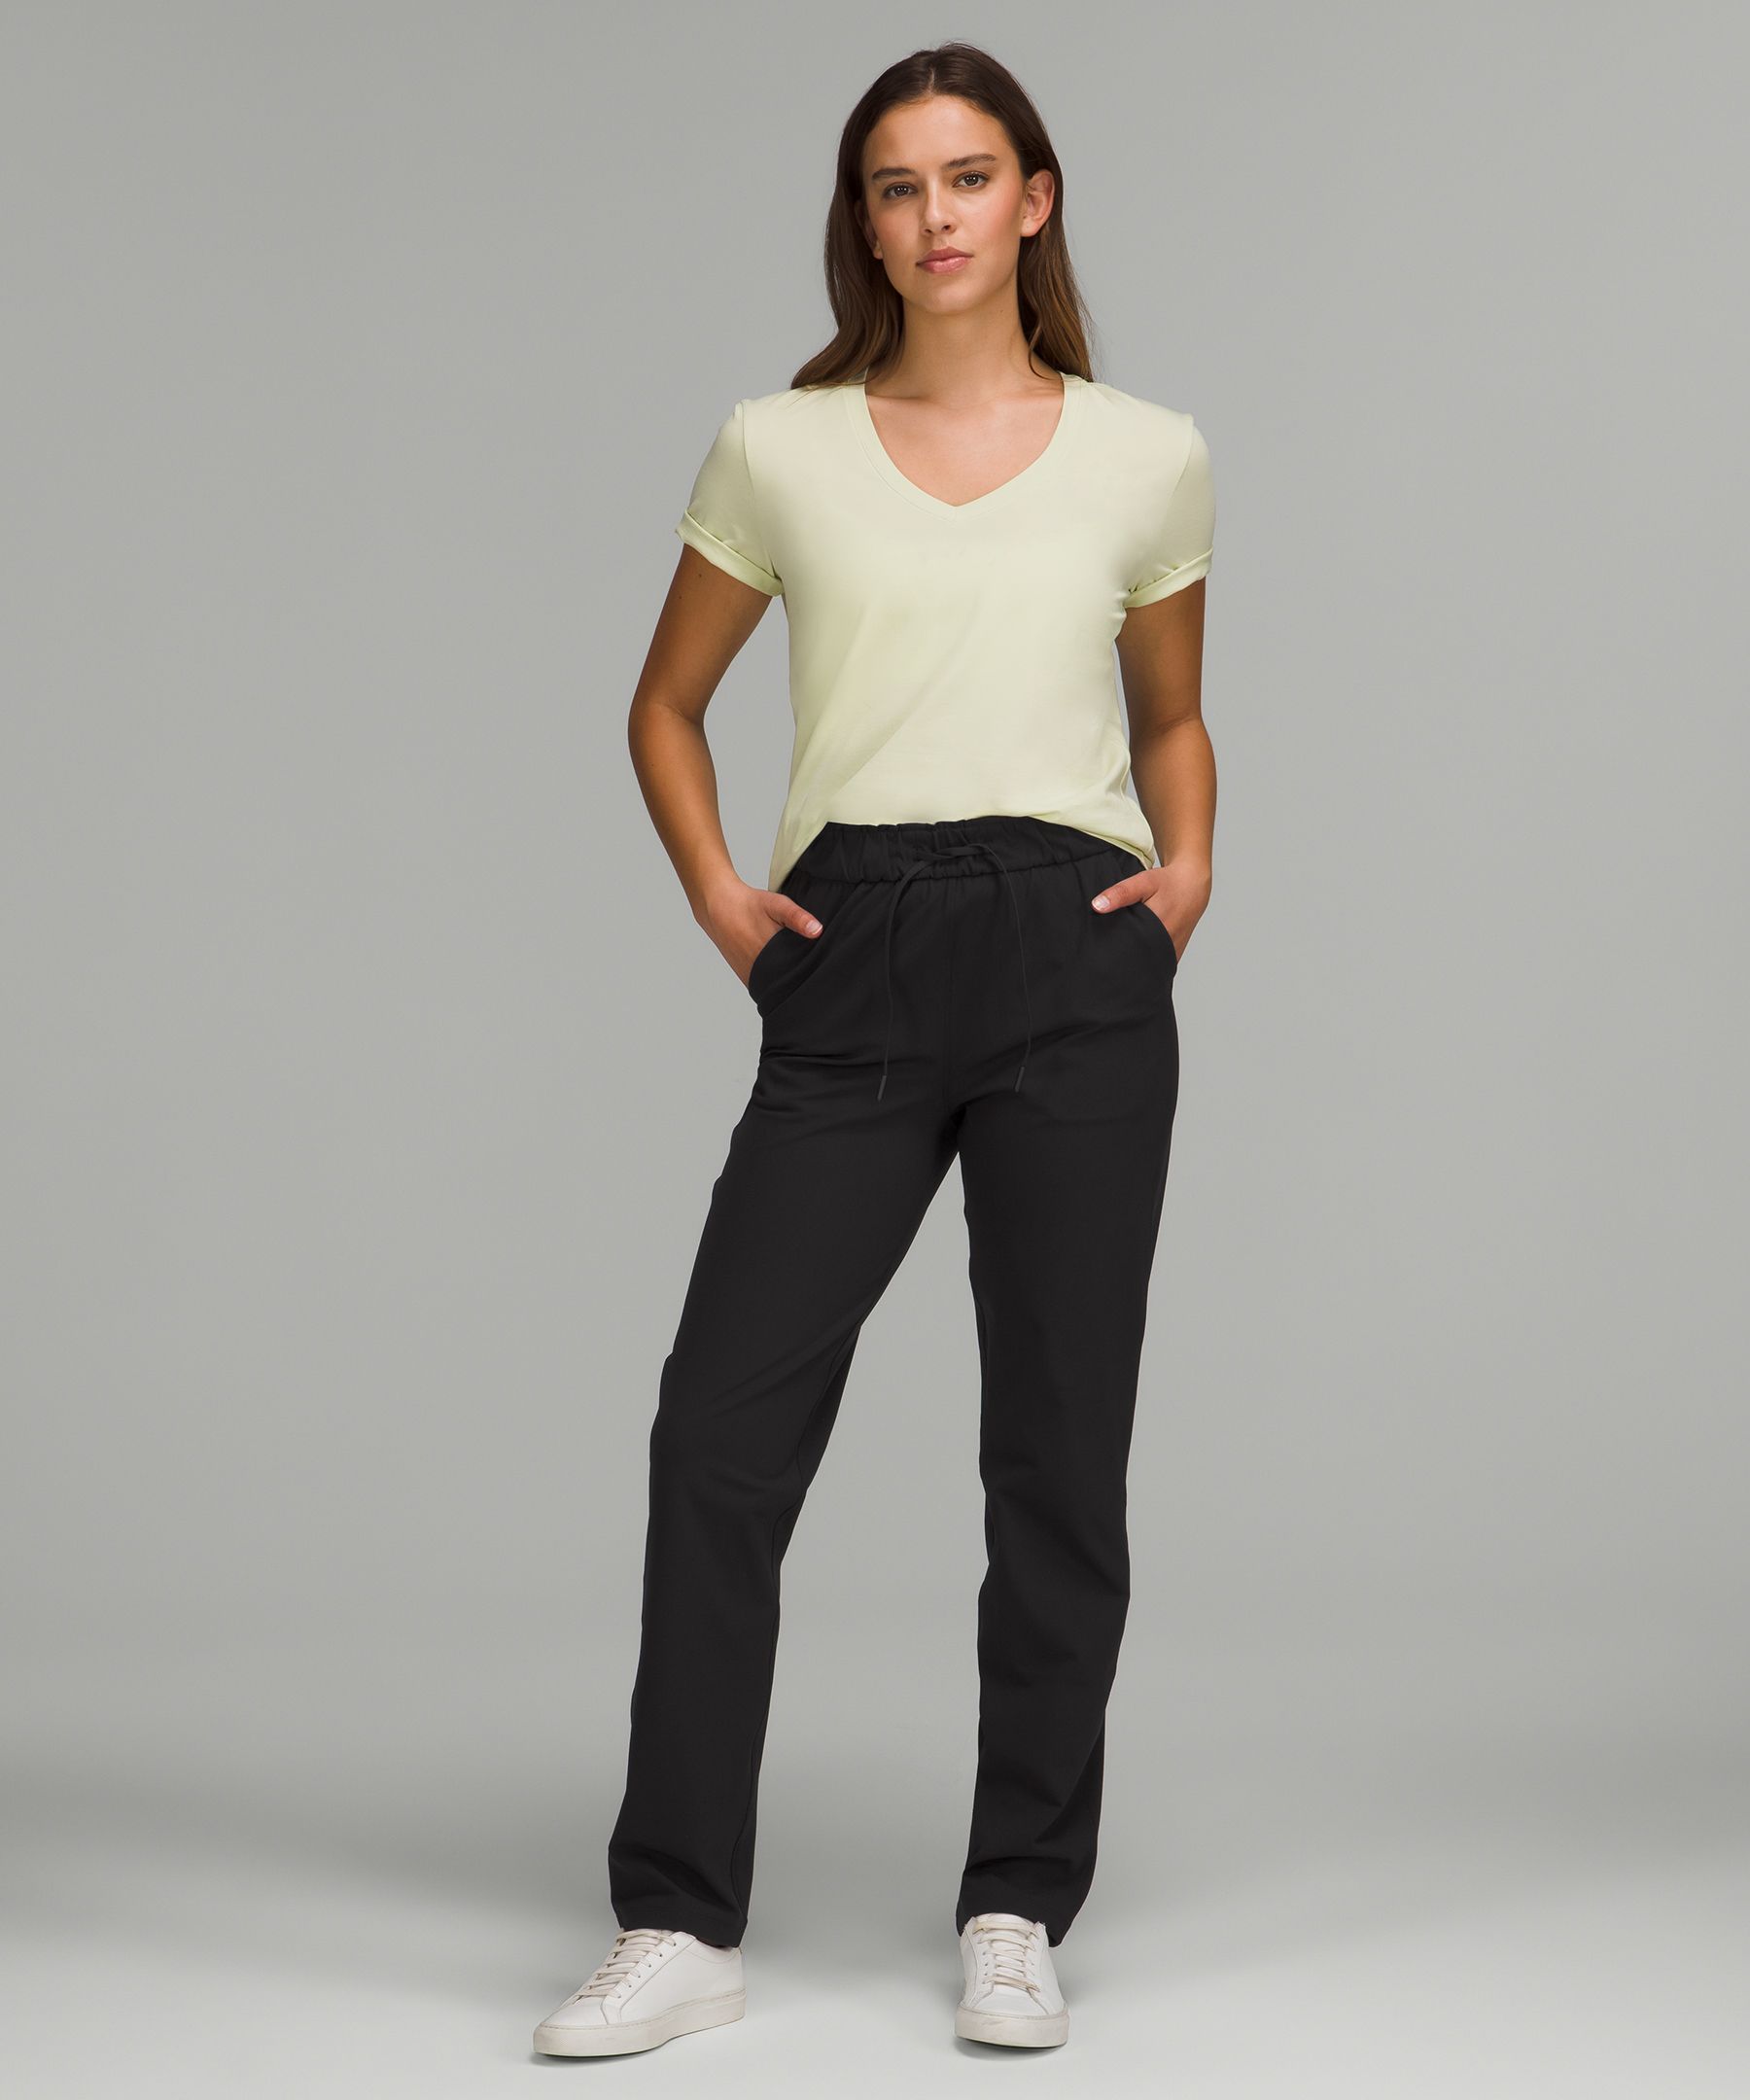 Stretch High-Rise Full Length Pant, Trousers